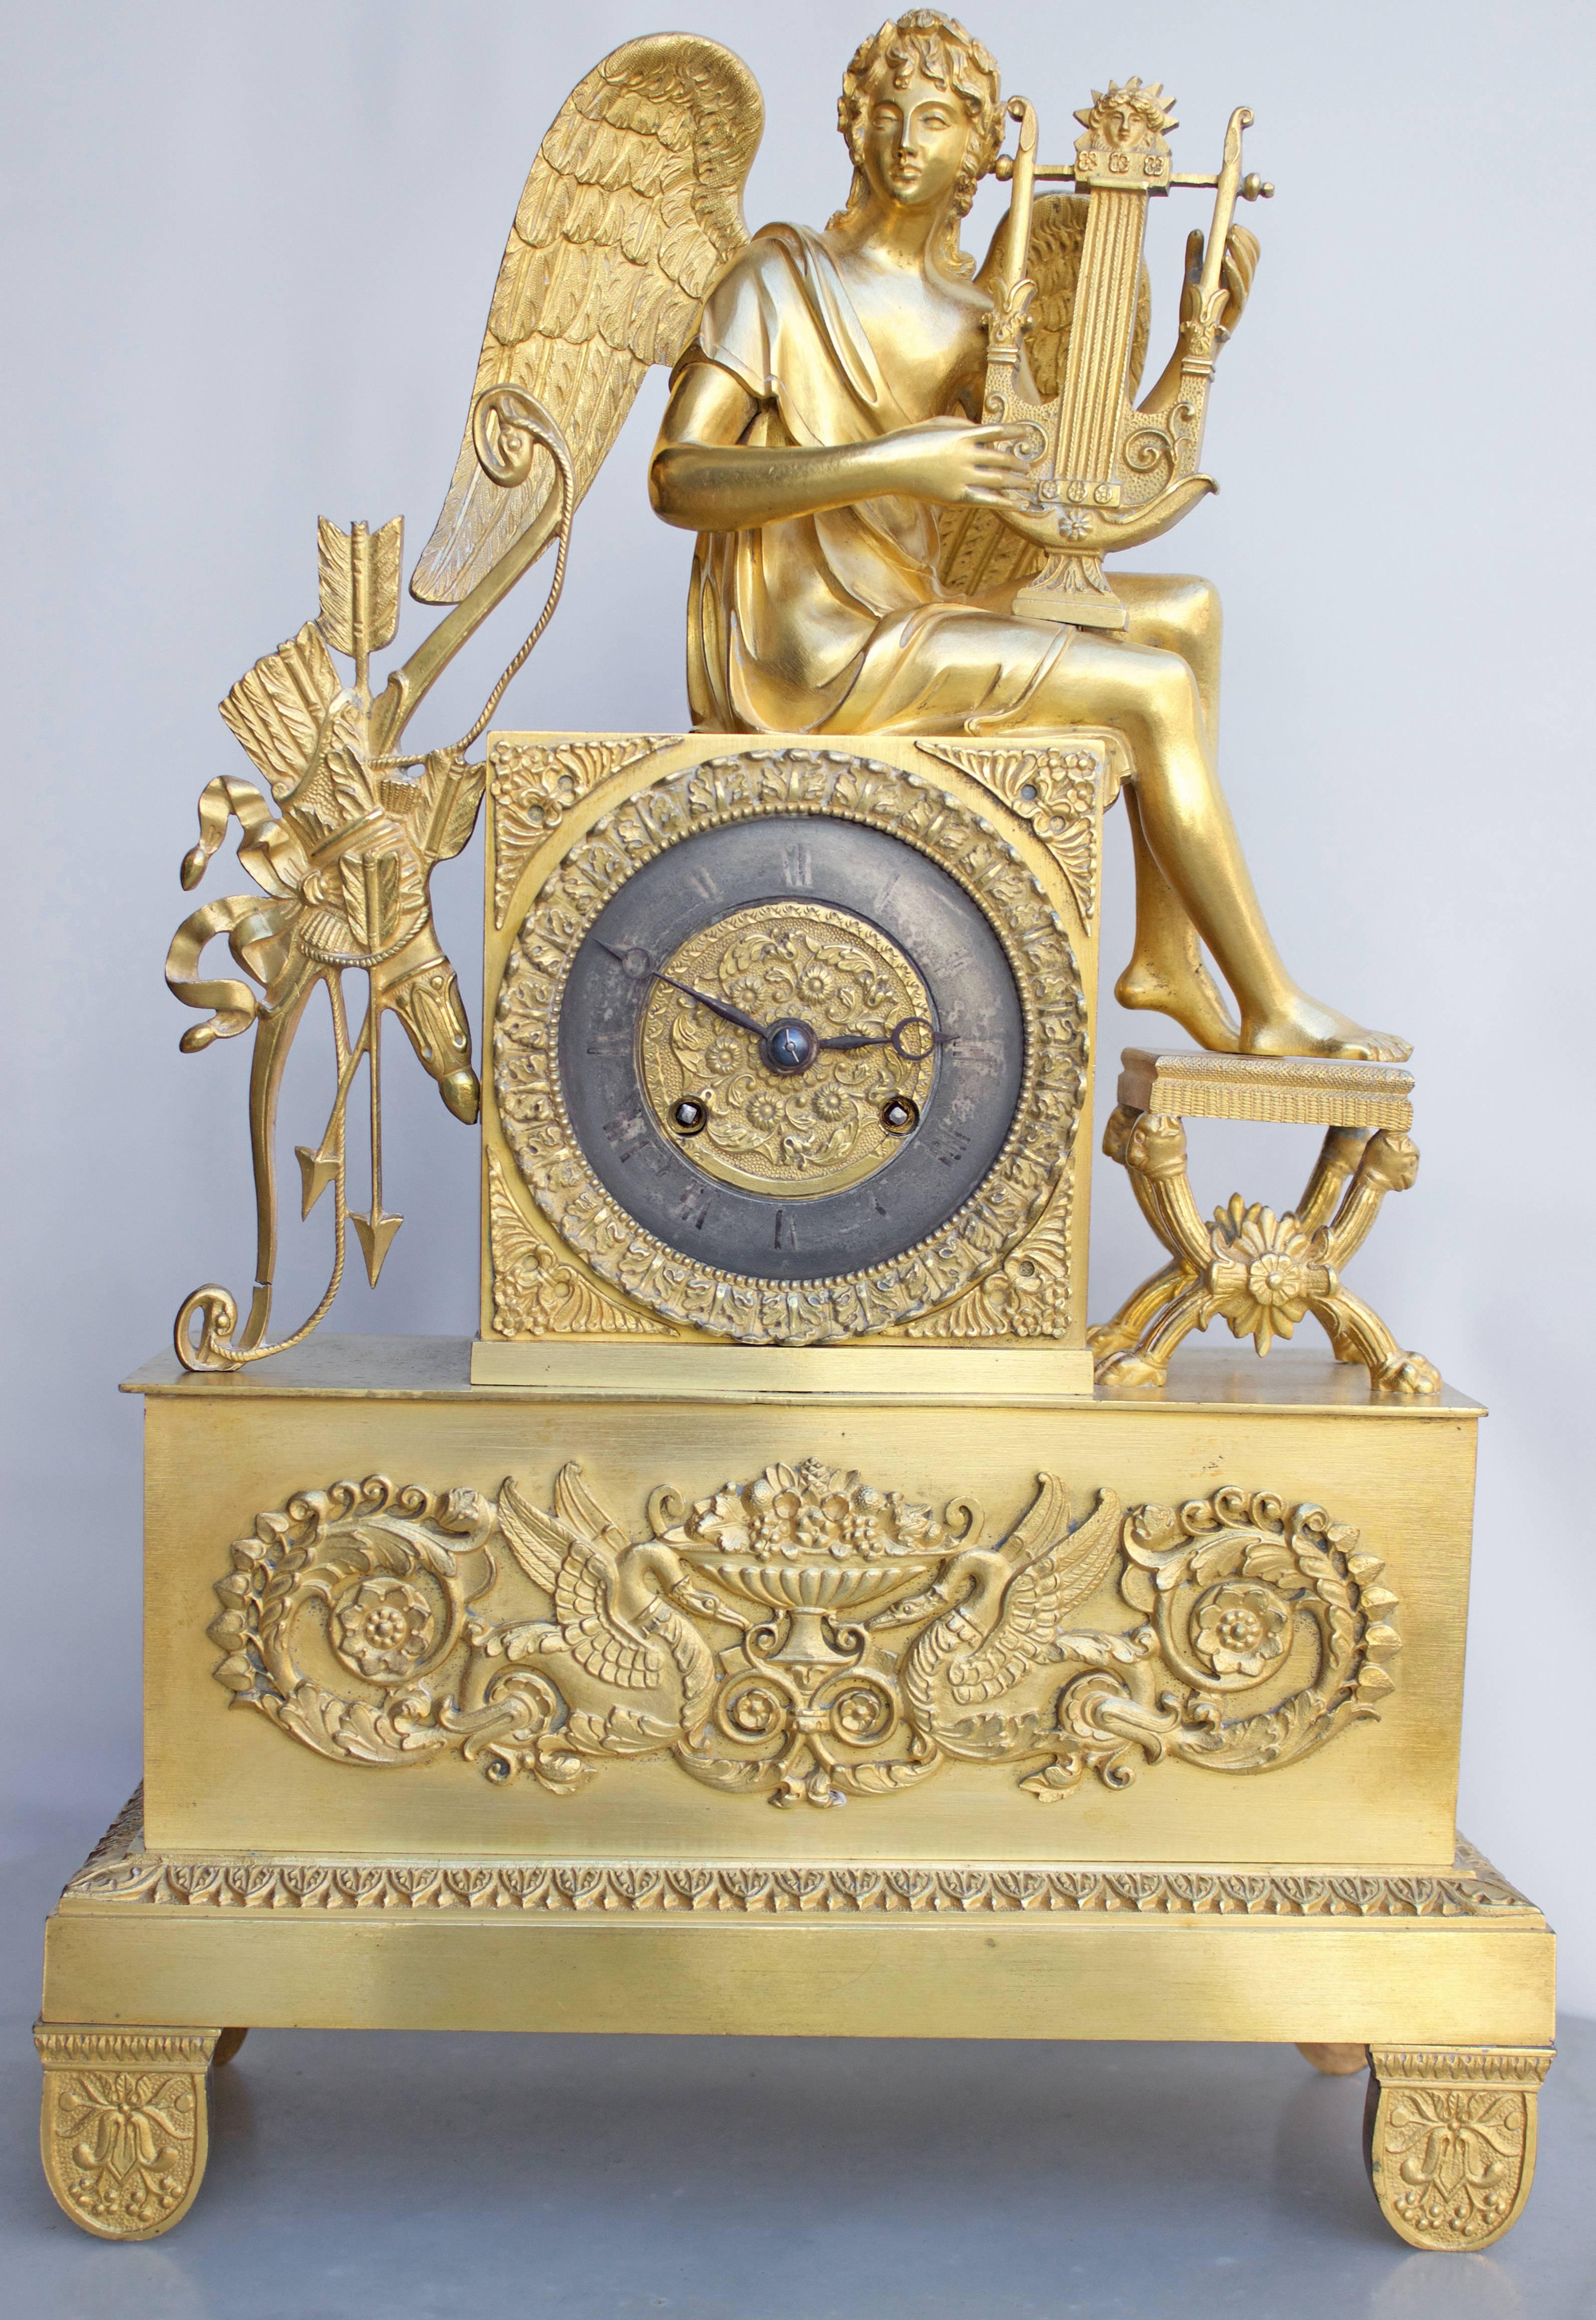 At top, a winged teenaged Angel dressed a L'Antique holding a lyre and resting his feet on a curule shaped seat. On left a quiver with its bow and three arrows. The clock has a blackened steel dial with engraved Roman numerals and hand cutted iron